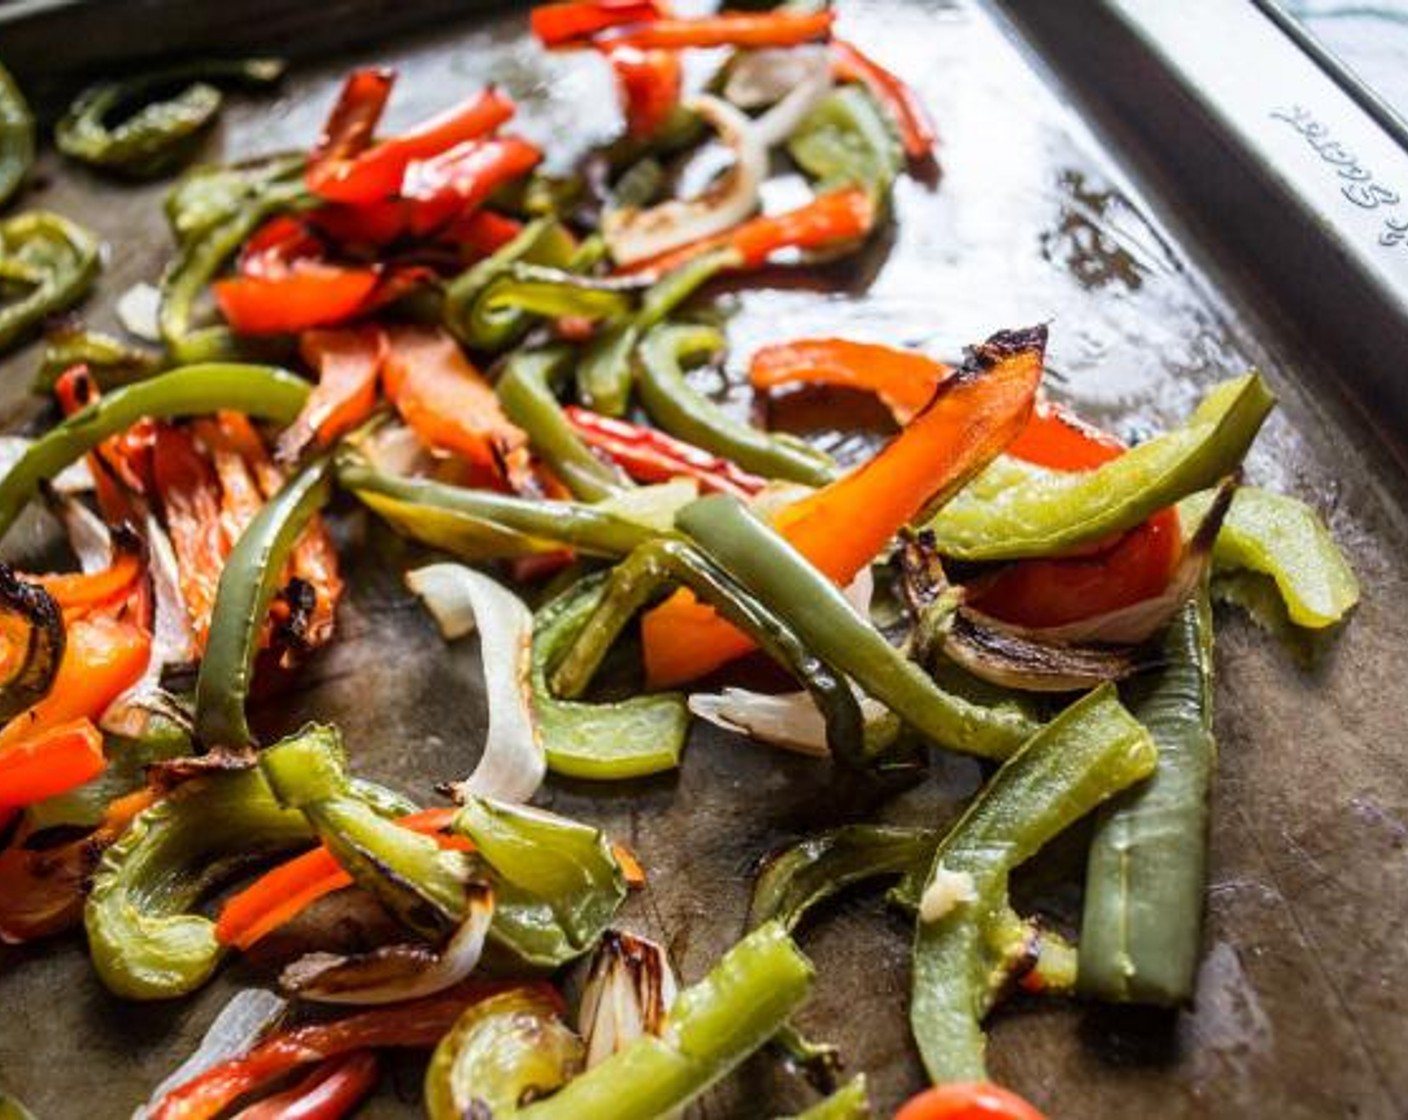 step 5 Spray baking sheet with cooking oil, and spread sliced Sweet Onion (1/2), Green Bell Pepper (1/2) and Red Chili Pepper (1/2) out into single layer and roast for 10-15 minutes or until edges begin to brown. Remove and set aside.